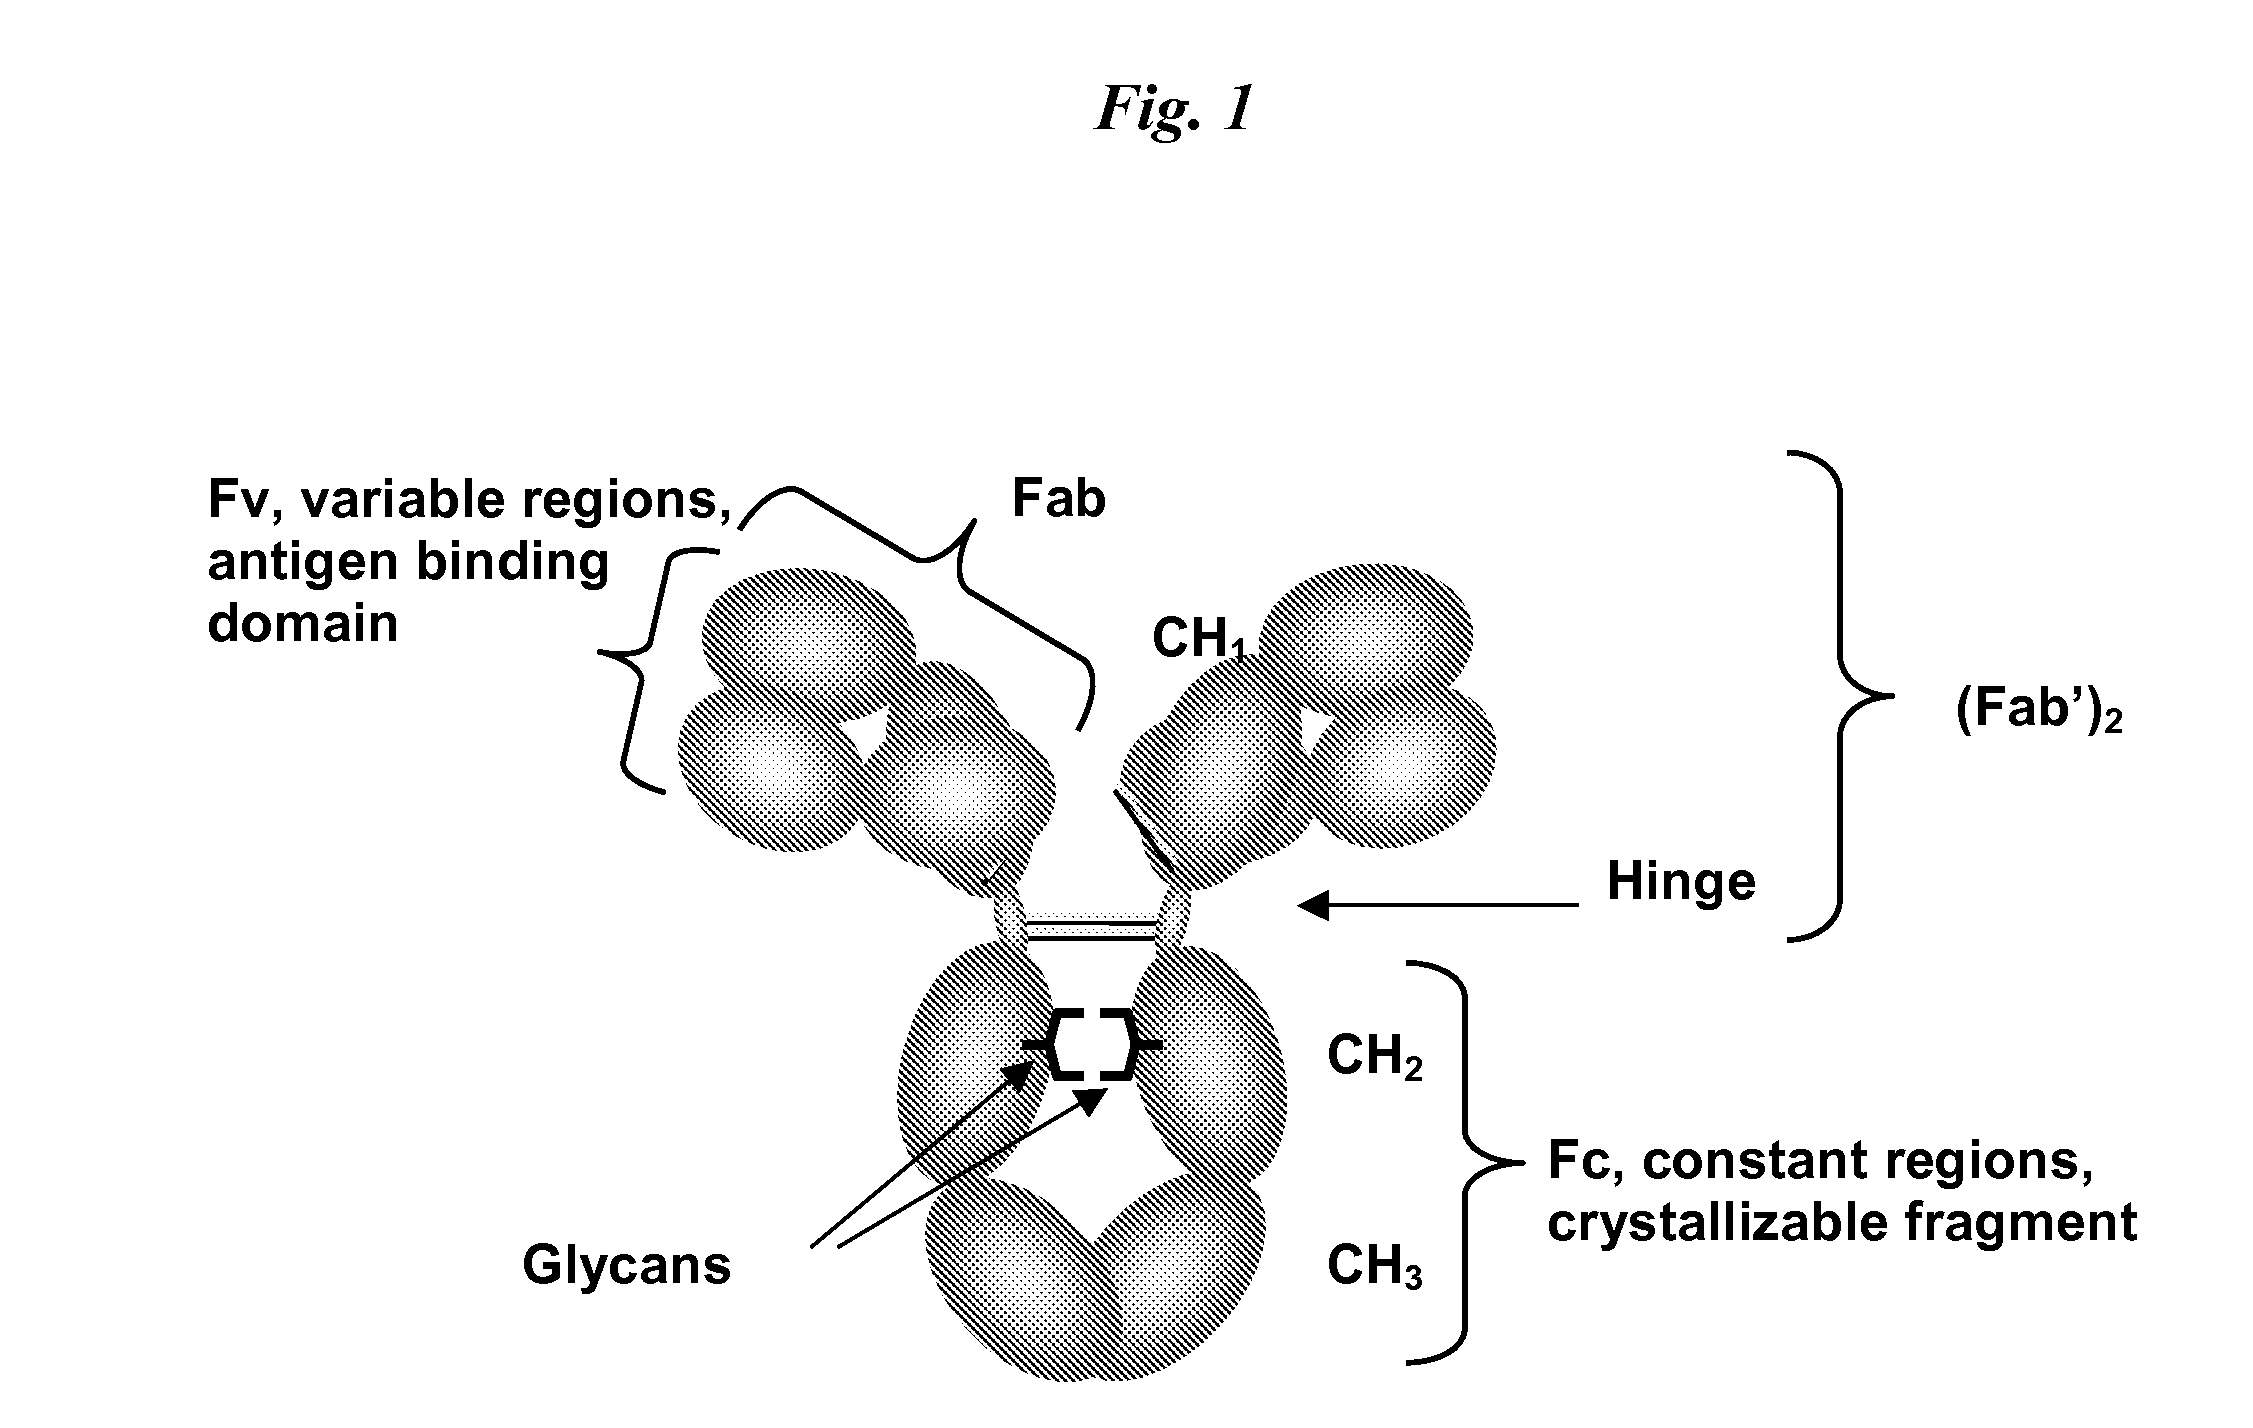 Immunoglobulin cleavage fragments as disease indicators and compositions for detecting and binding such